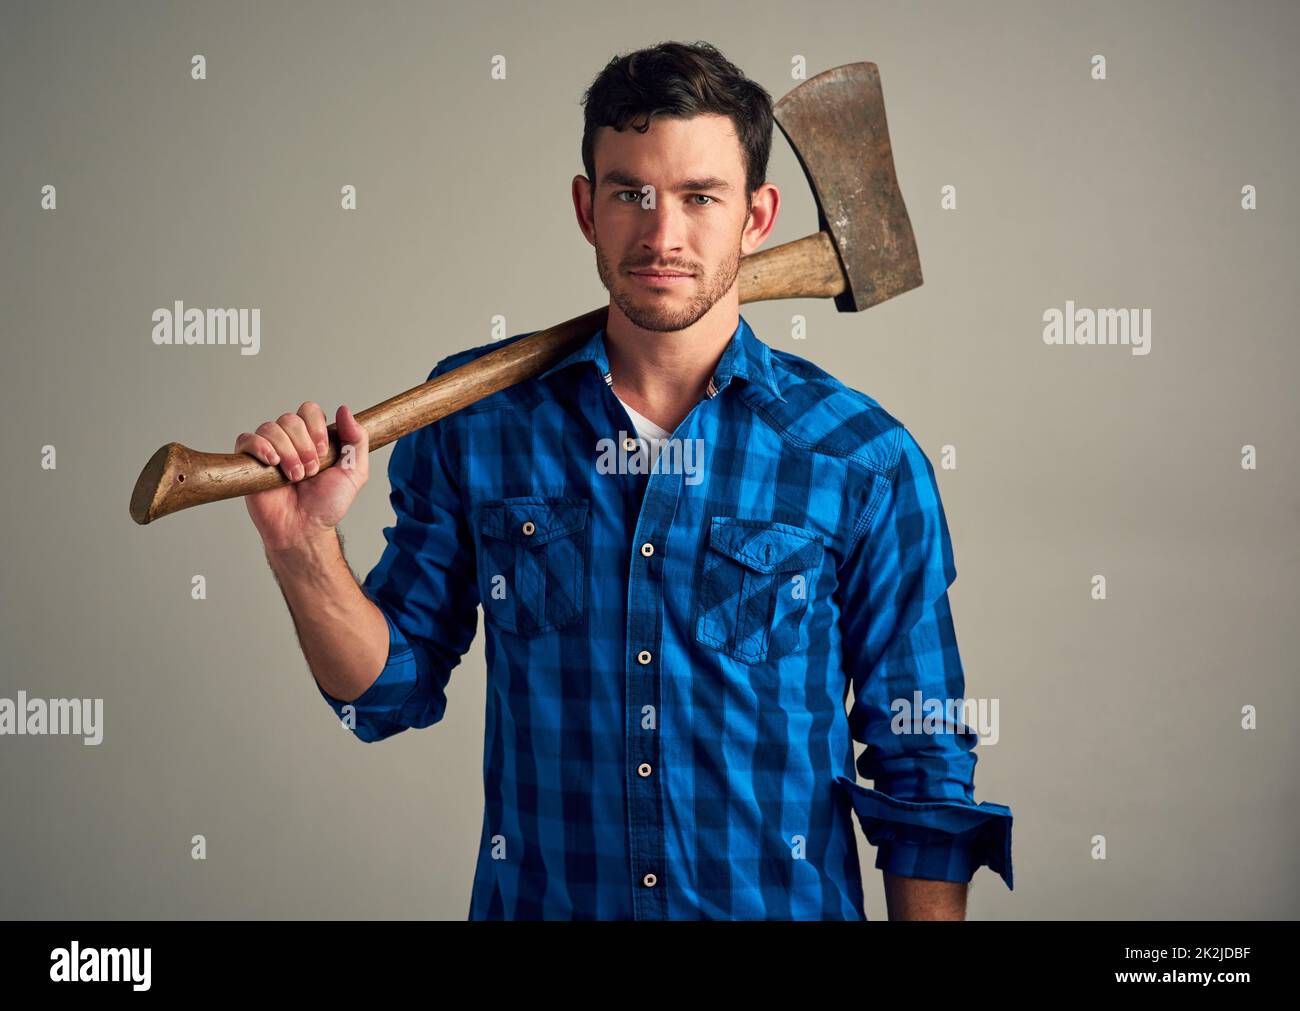 Download Goofy Man Expressing Surprise while Holding an Axe